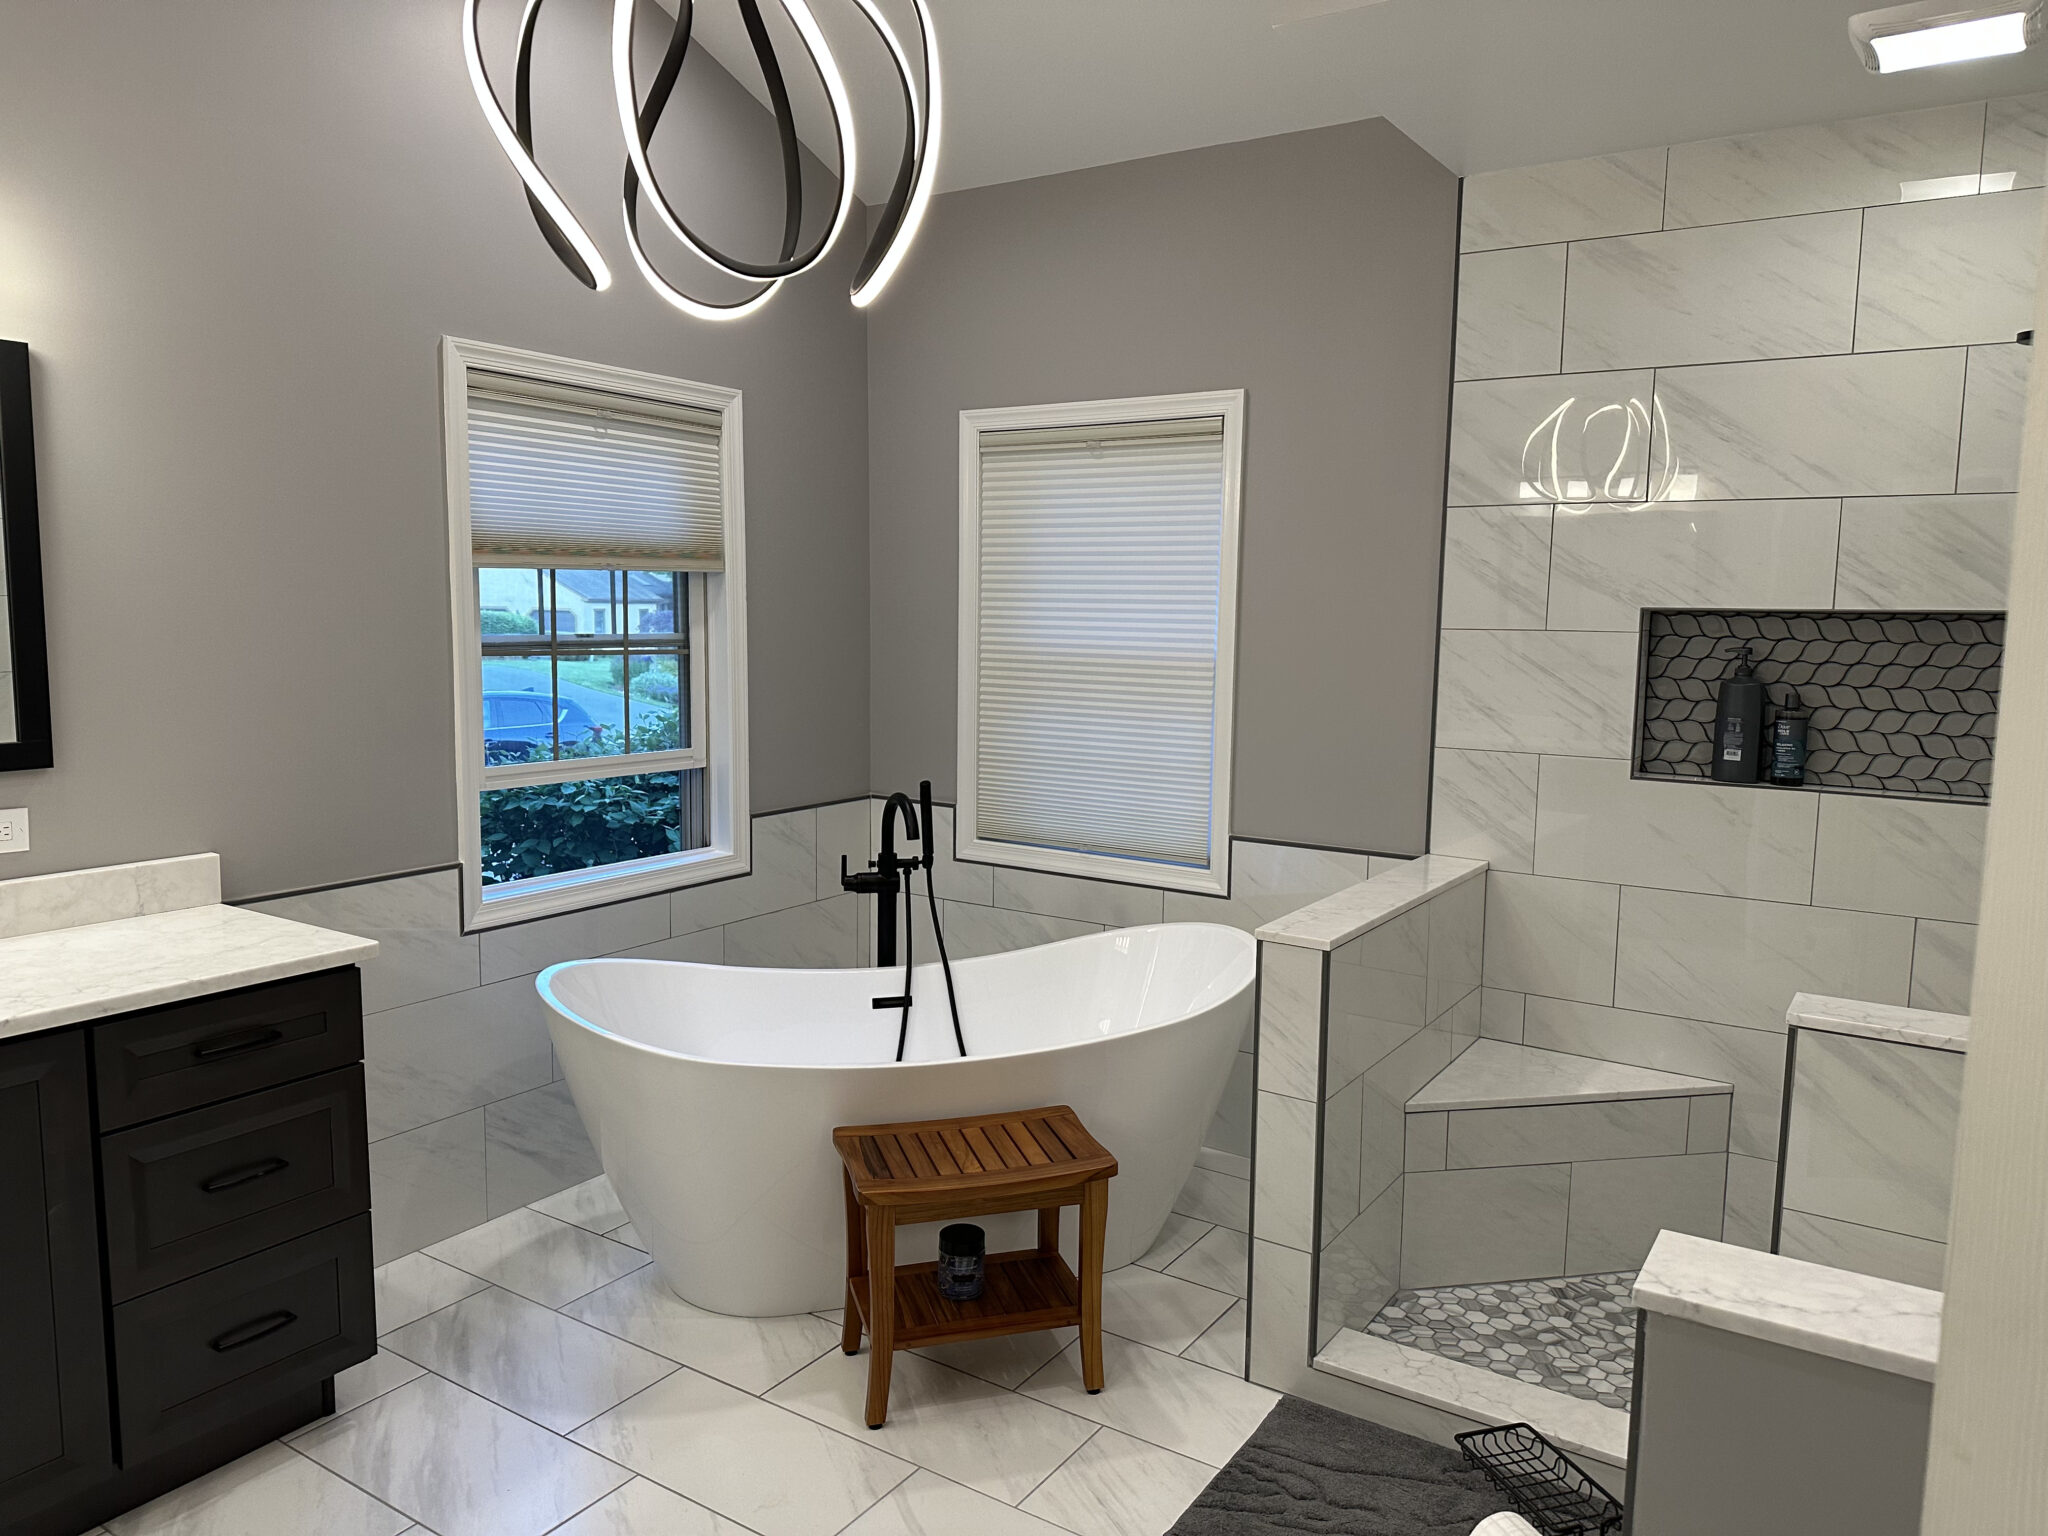 Shower & Bathroom Remodeling Services in Malvern PA